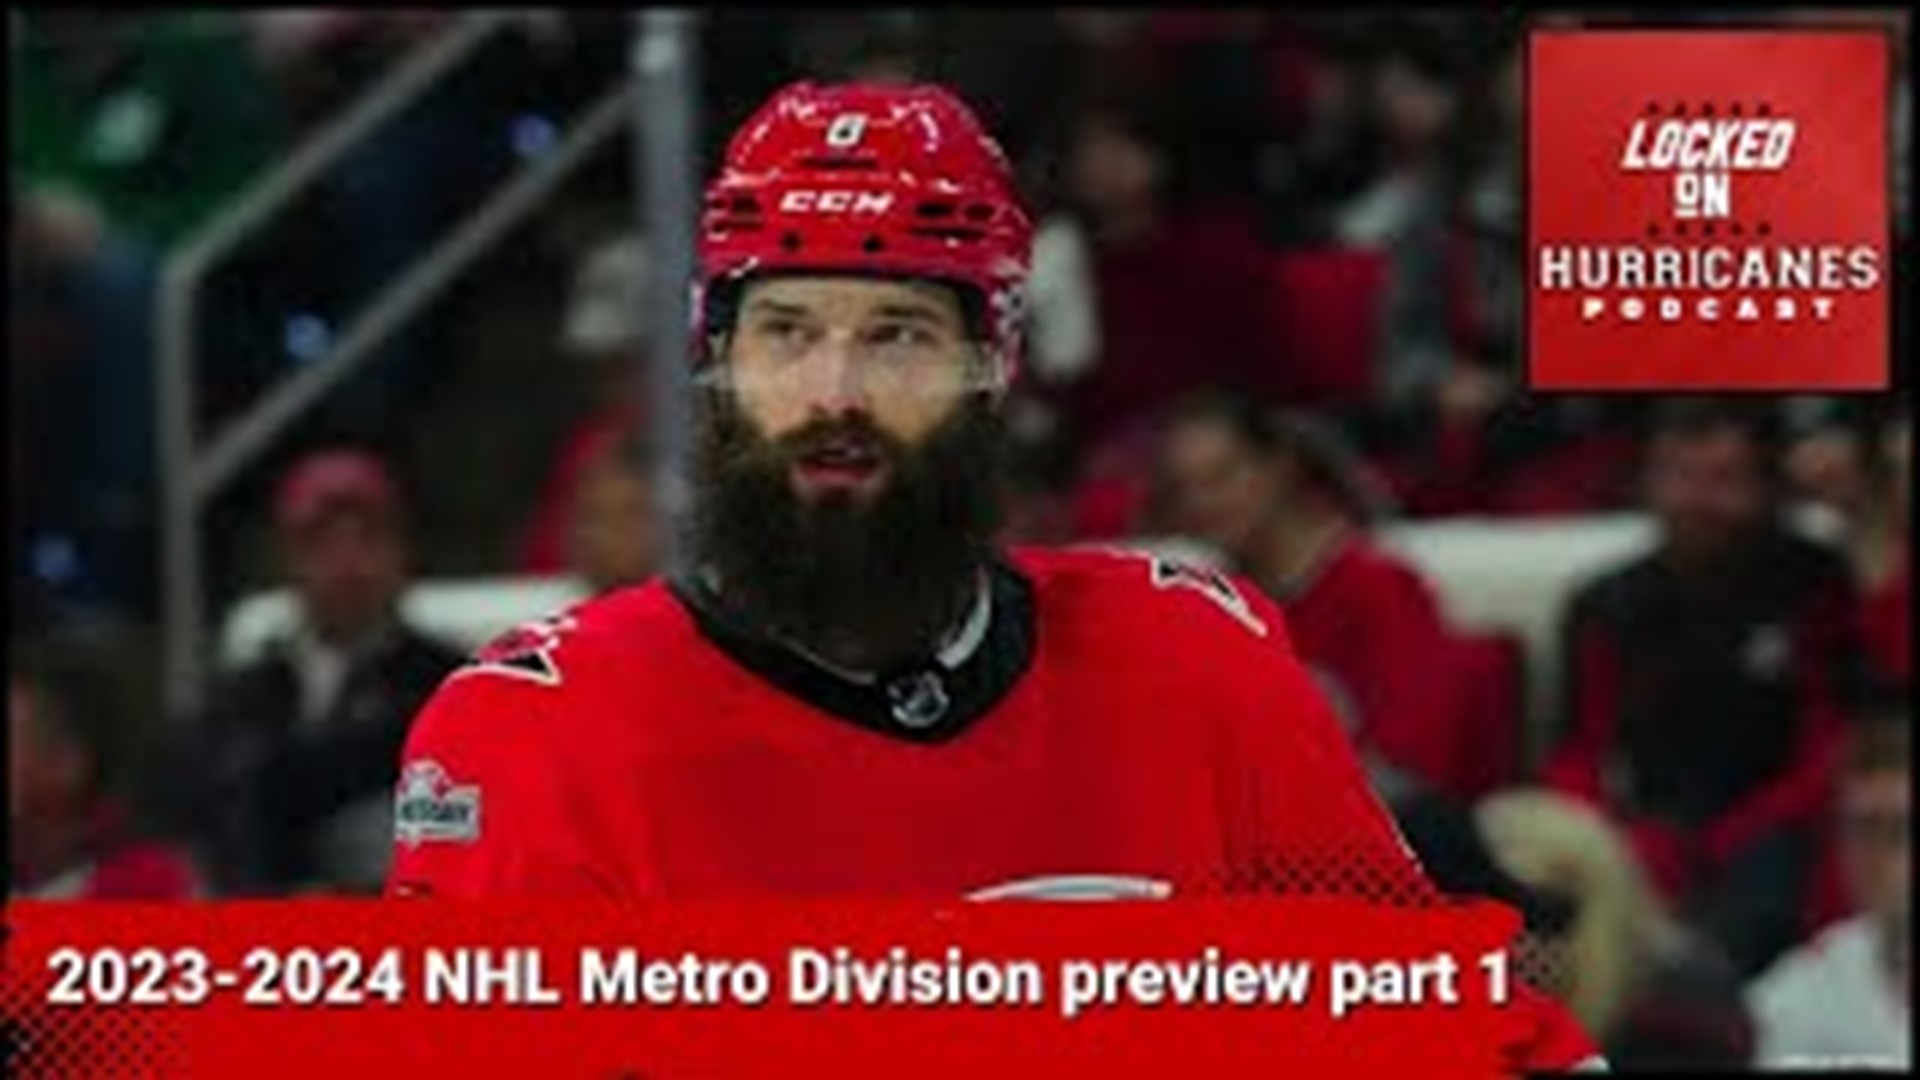 With the new season coming right up, we're previewing every division. We start in the Metro, looking at how the Canes stack up. That and more on Locked On Hurricanes